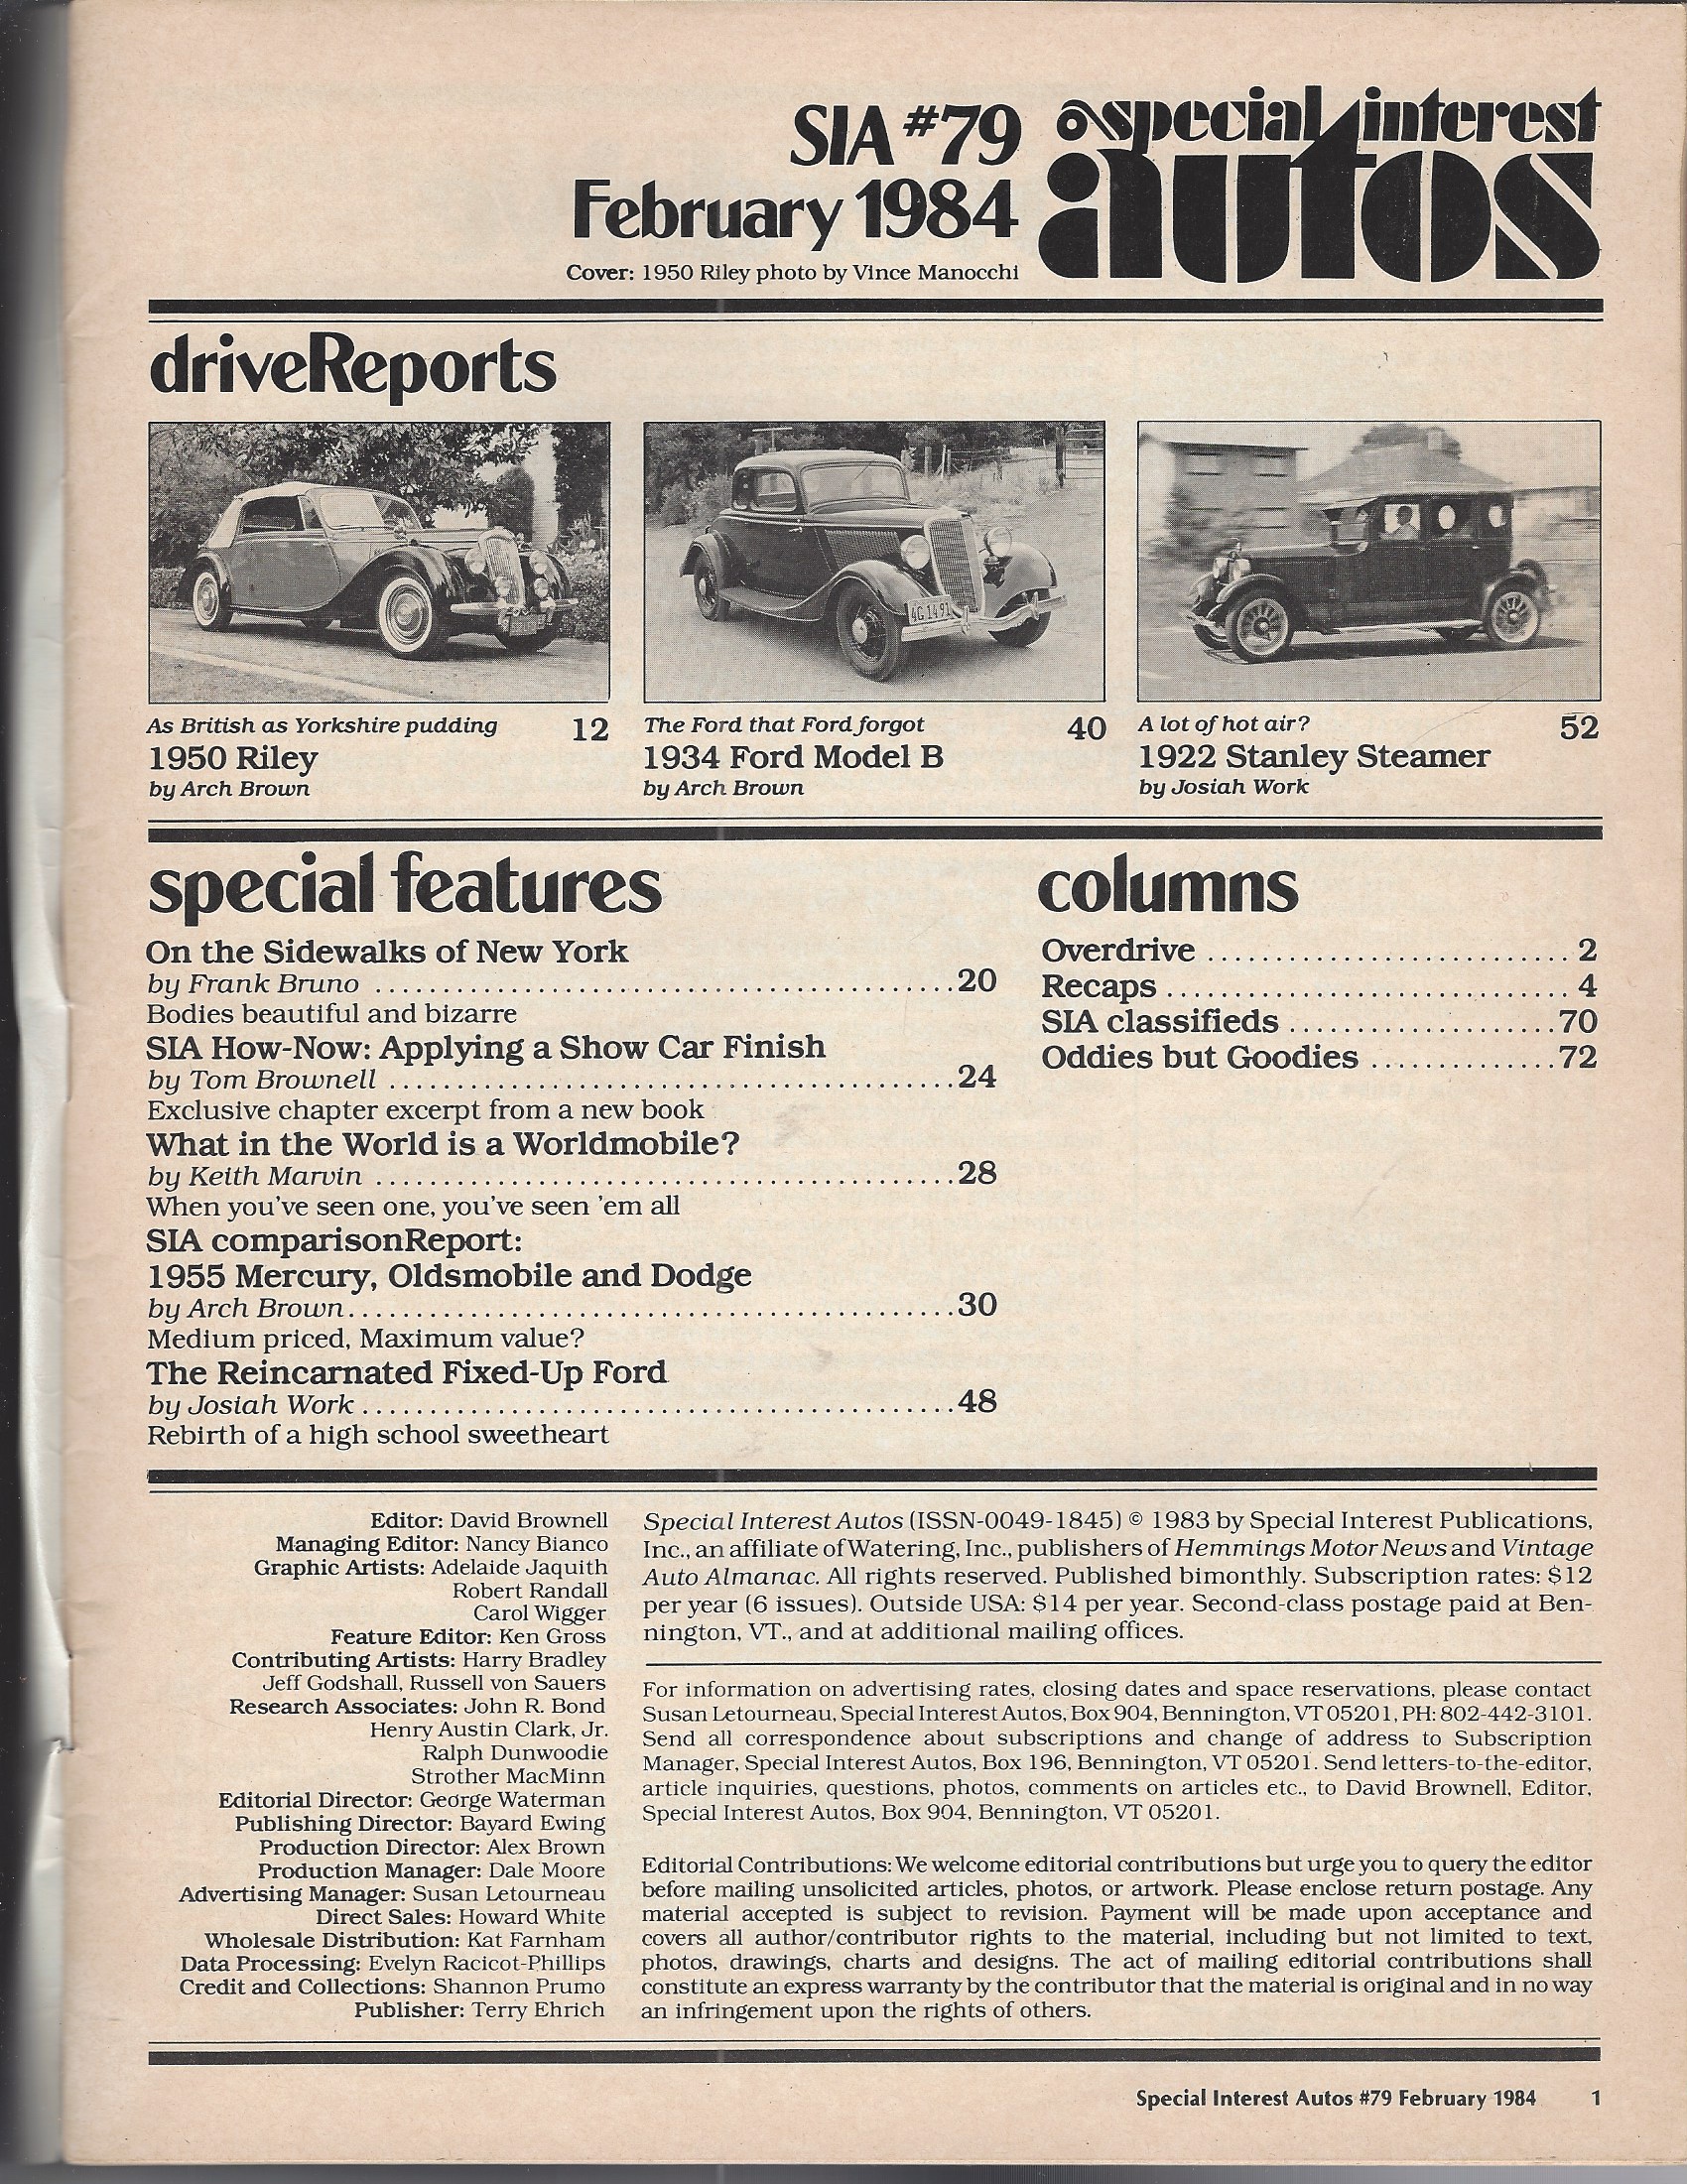 BROWNELL DAVID, EDITOR - Special Interest Autos S I a # 79 February 1984